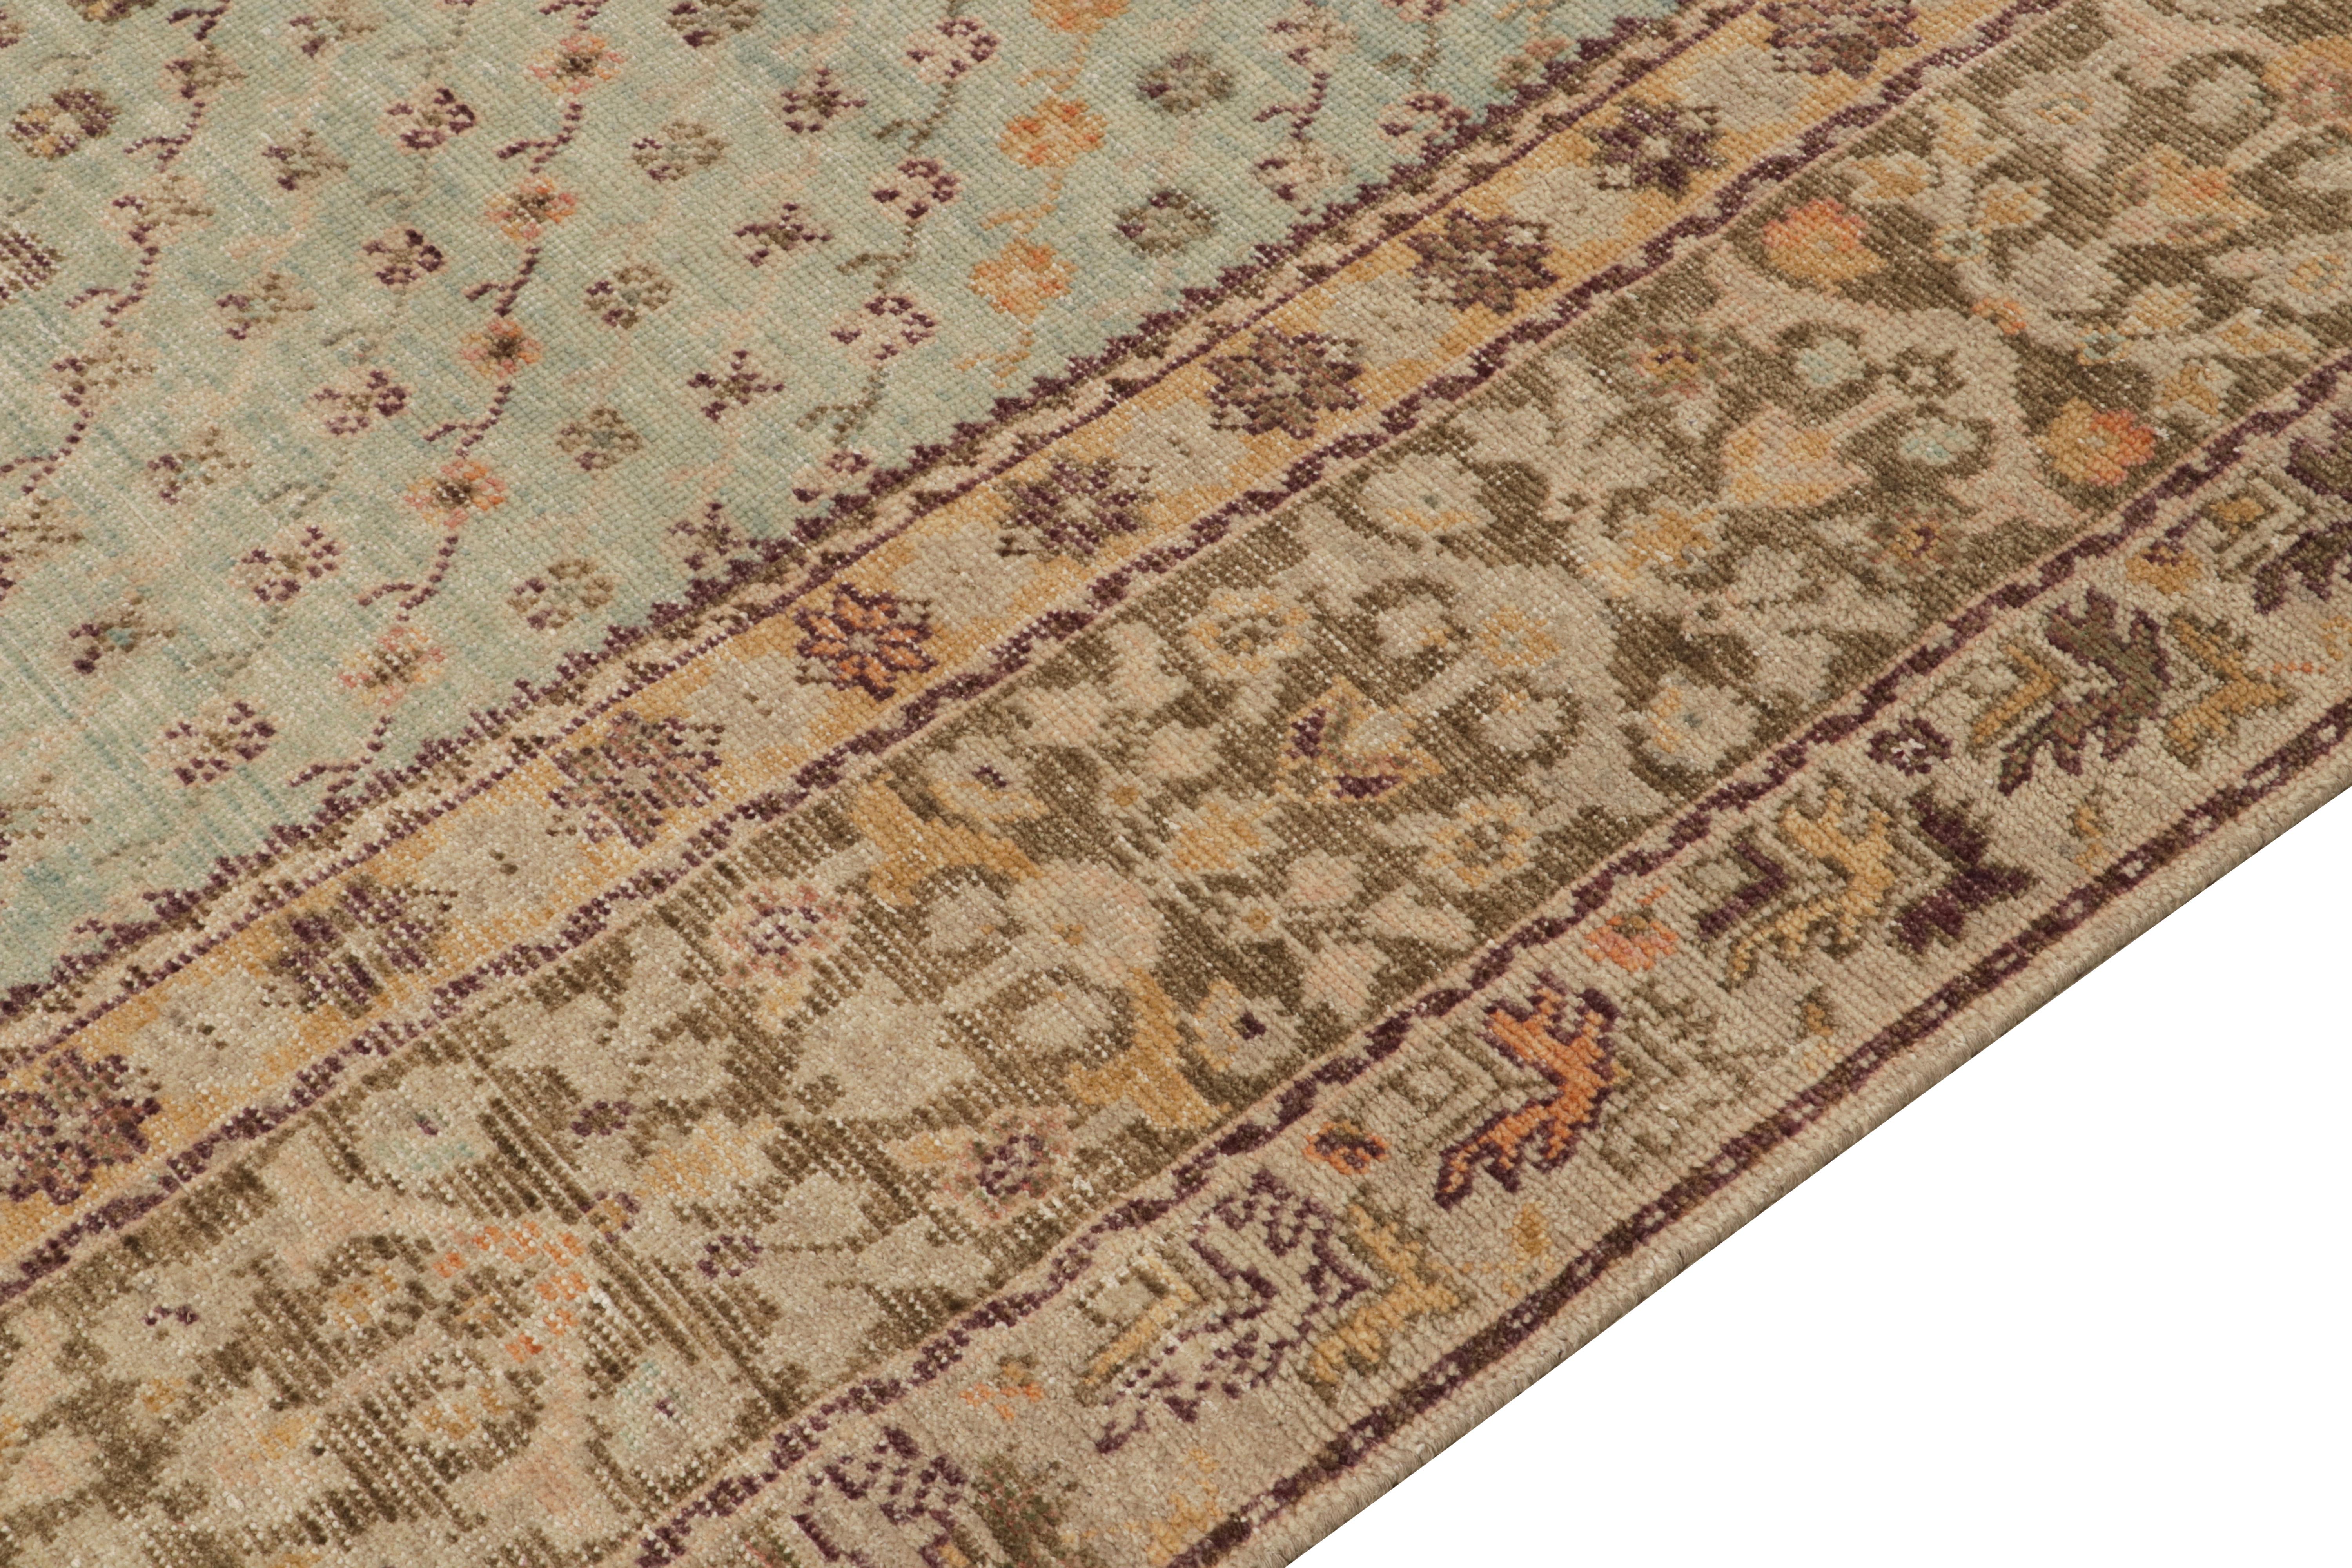 Hand-Knotted Rug & Kilim's Distressed Style Rug in Blue, Beige-Brown Floral Pattern For Sale